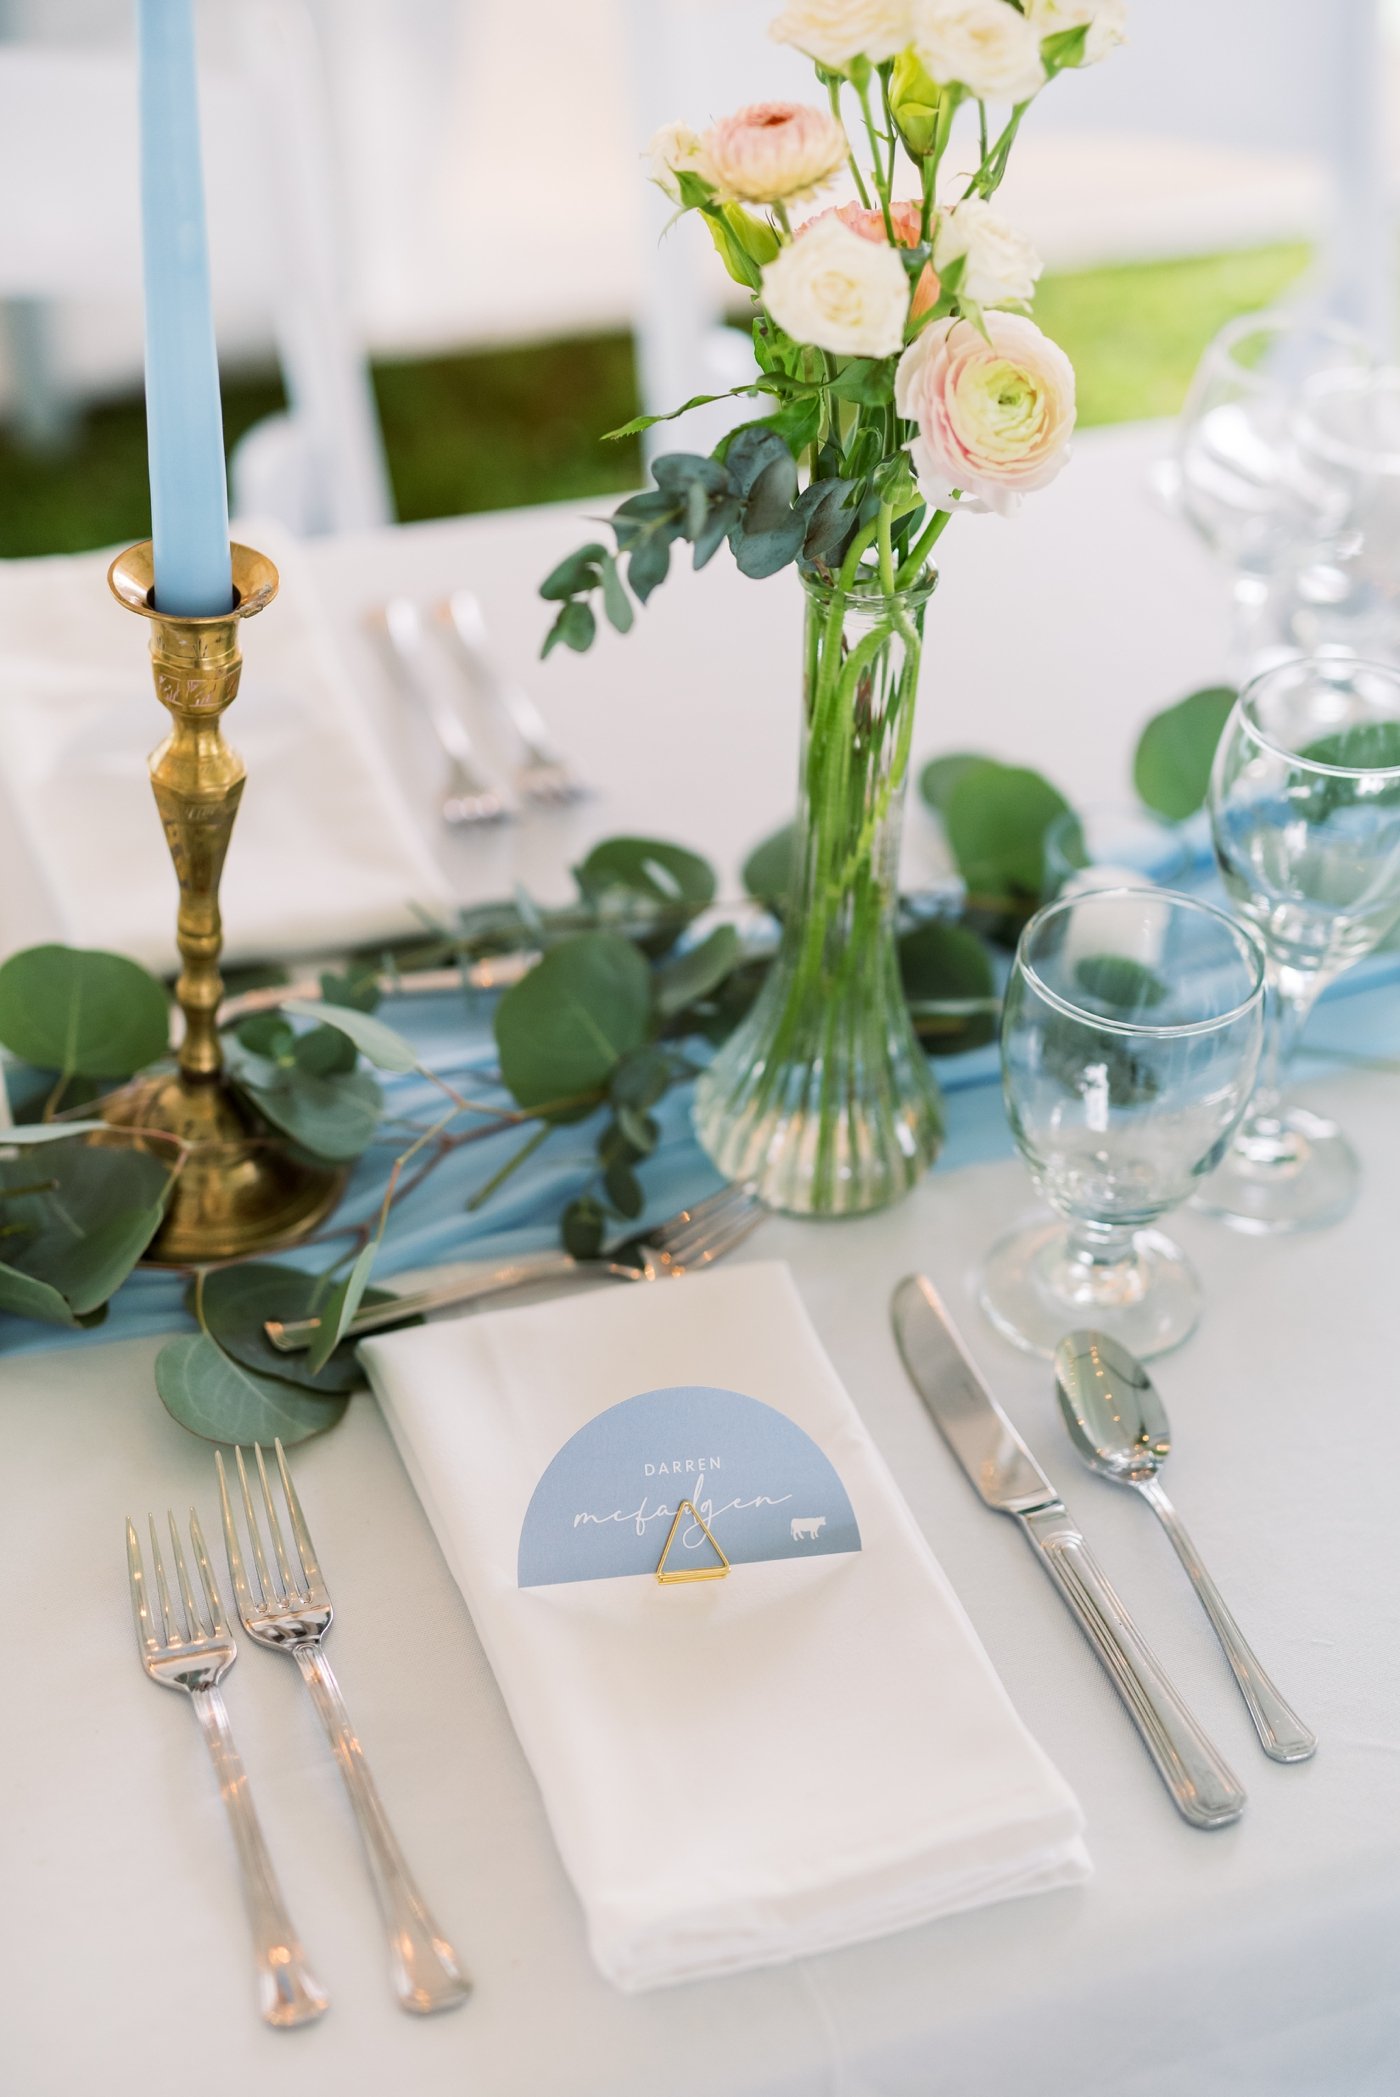 Coastal wedding table setting with powder blue place card and white linens